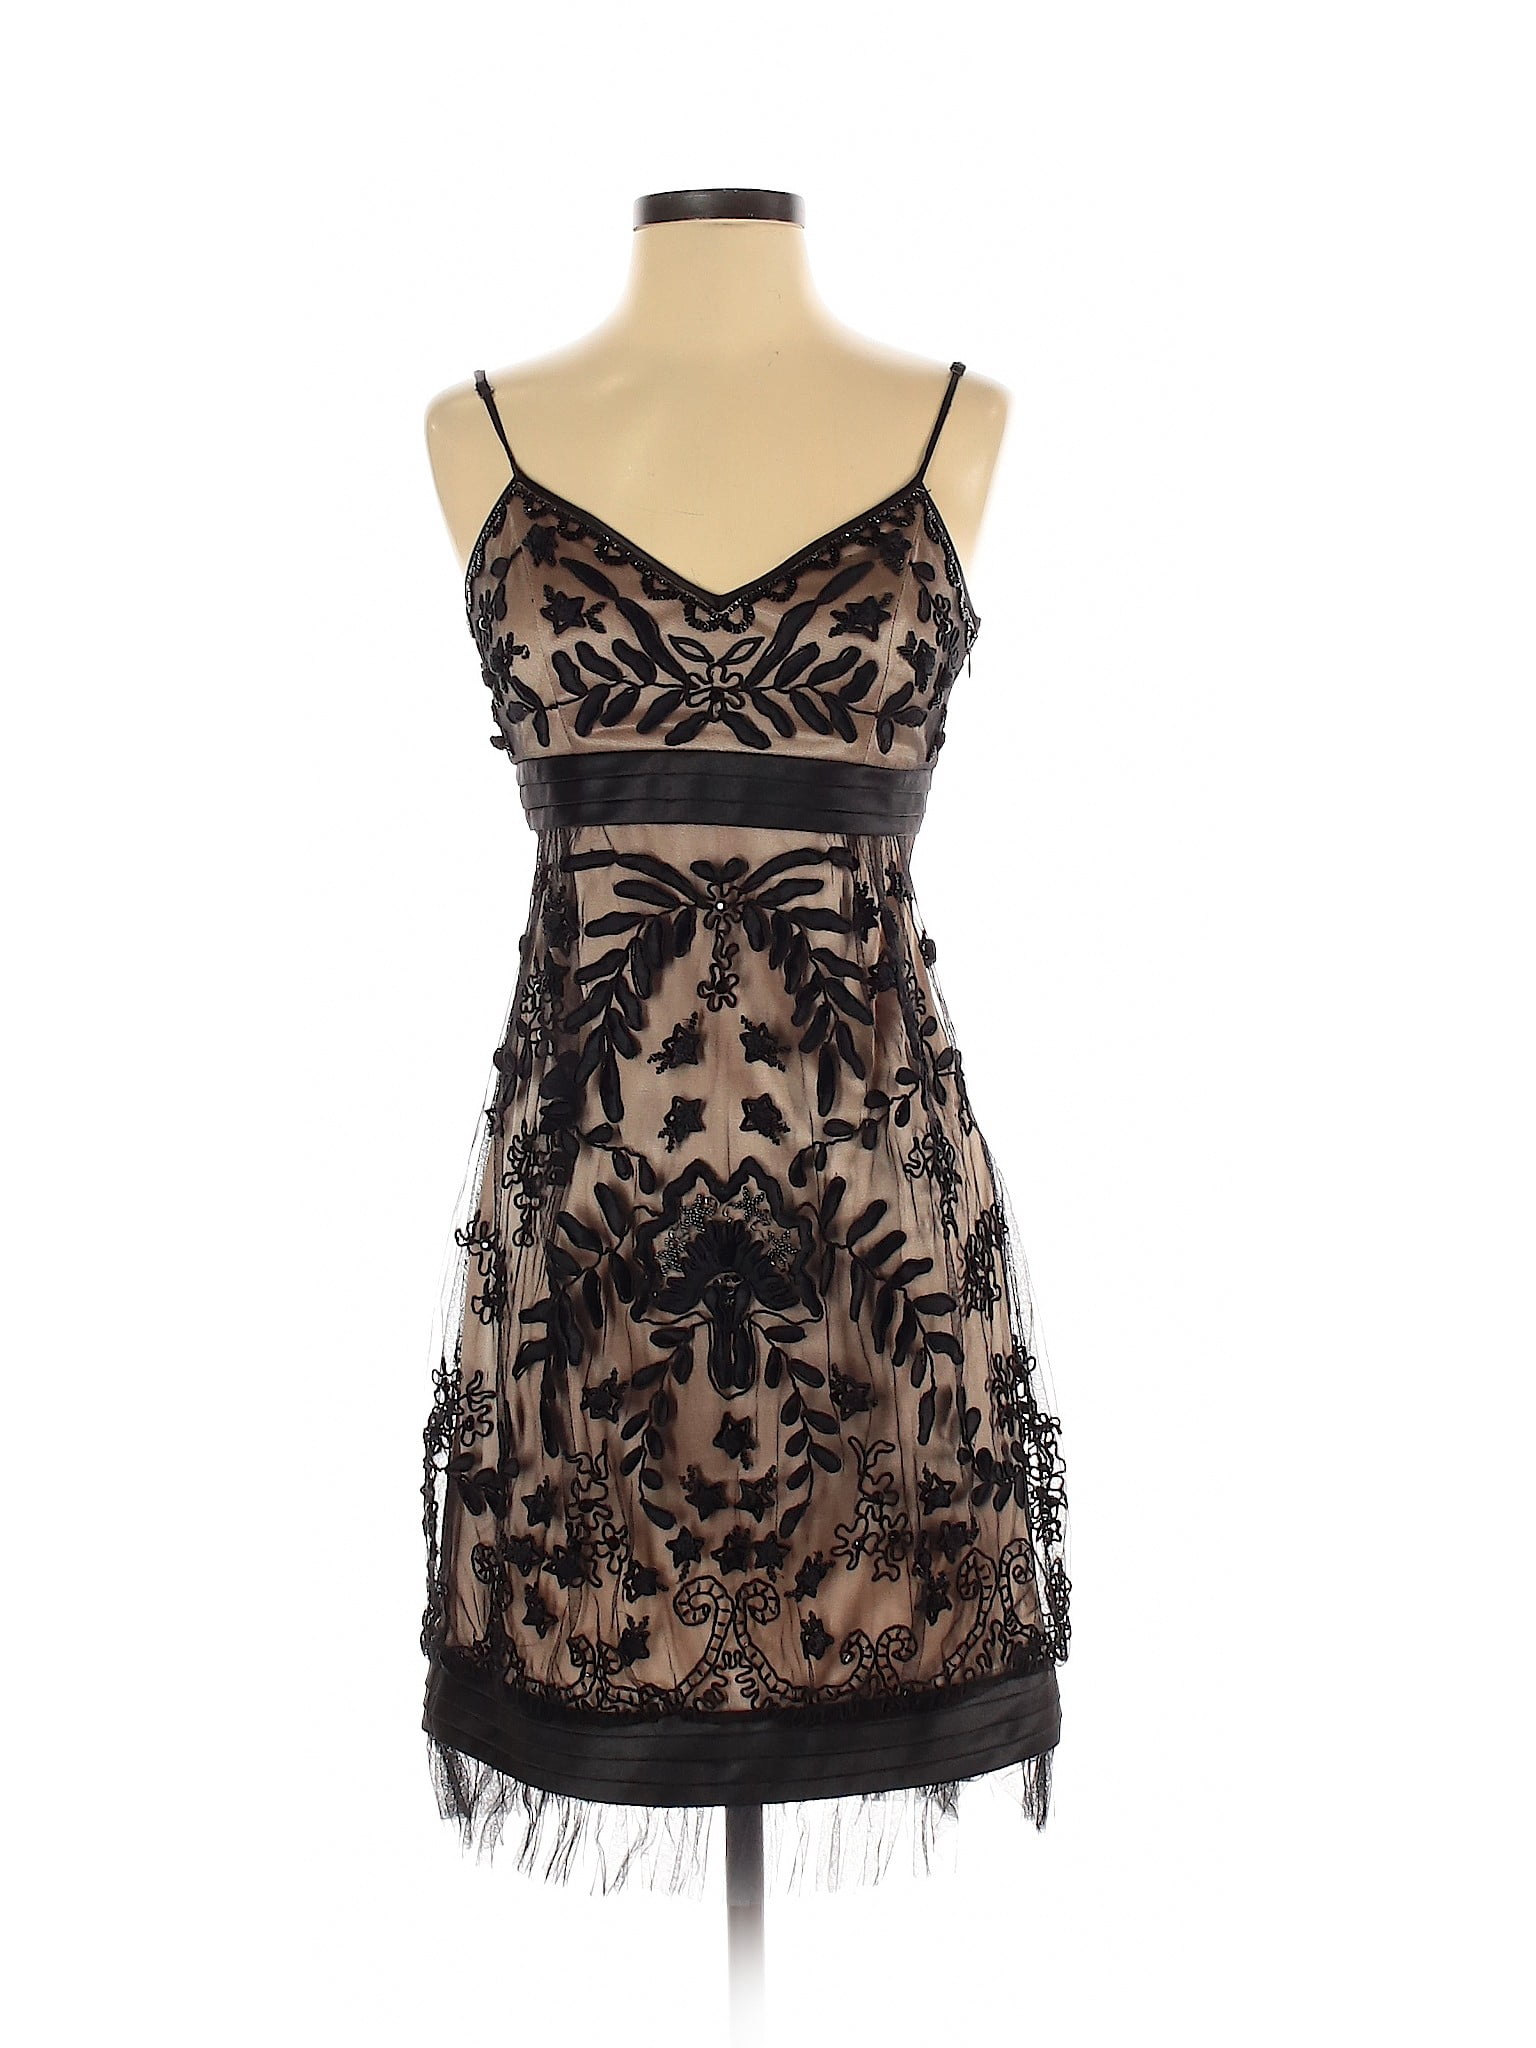 Sue Wong - Pre-Owned Sue Wong Nocturne Women's Size 2 Cocktail Dress ...